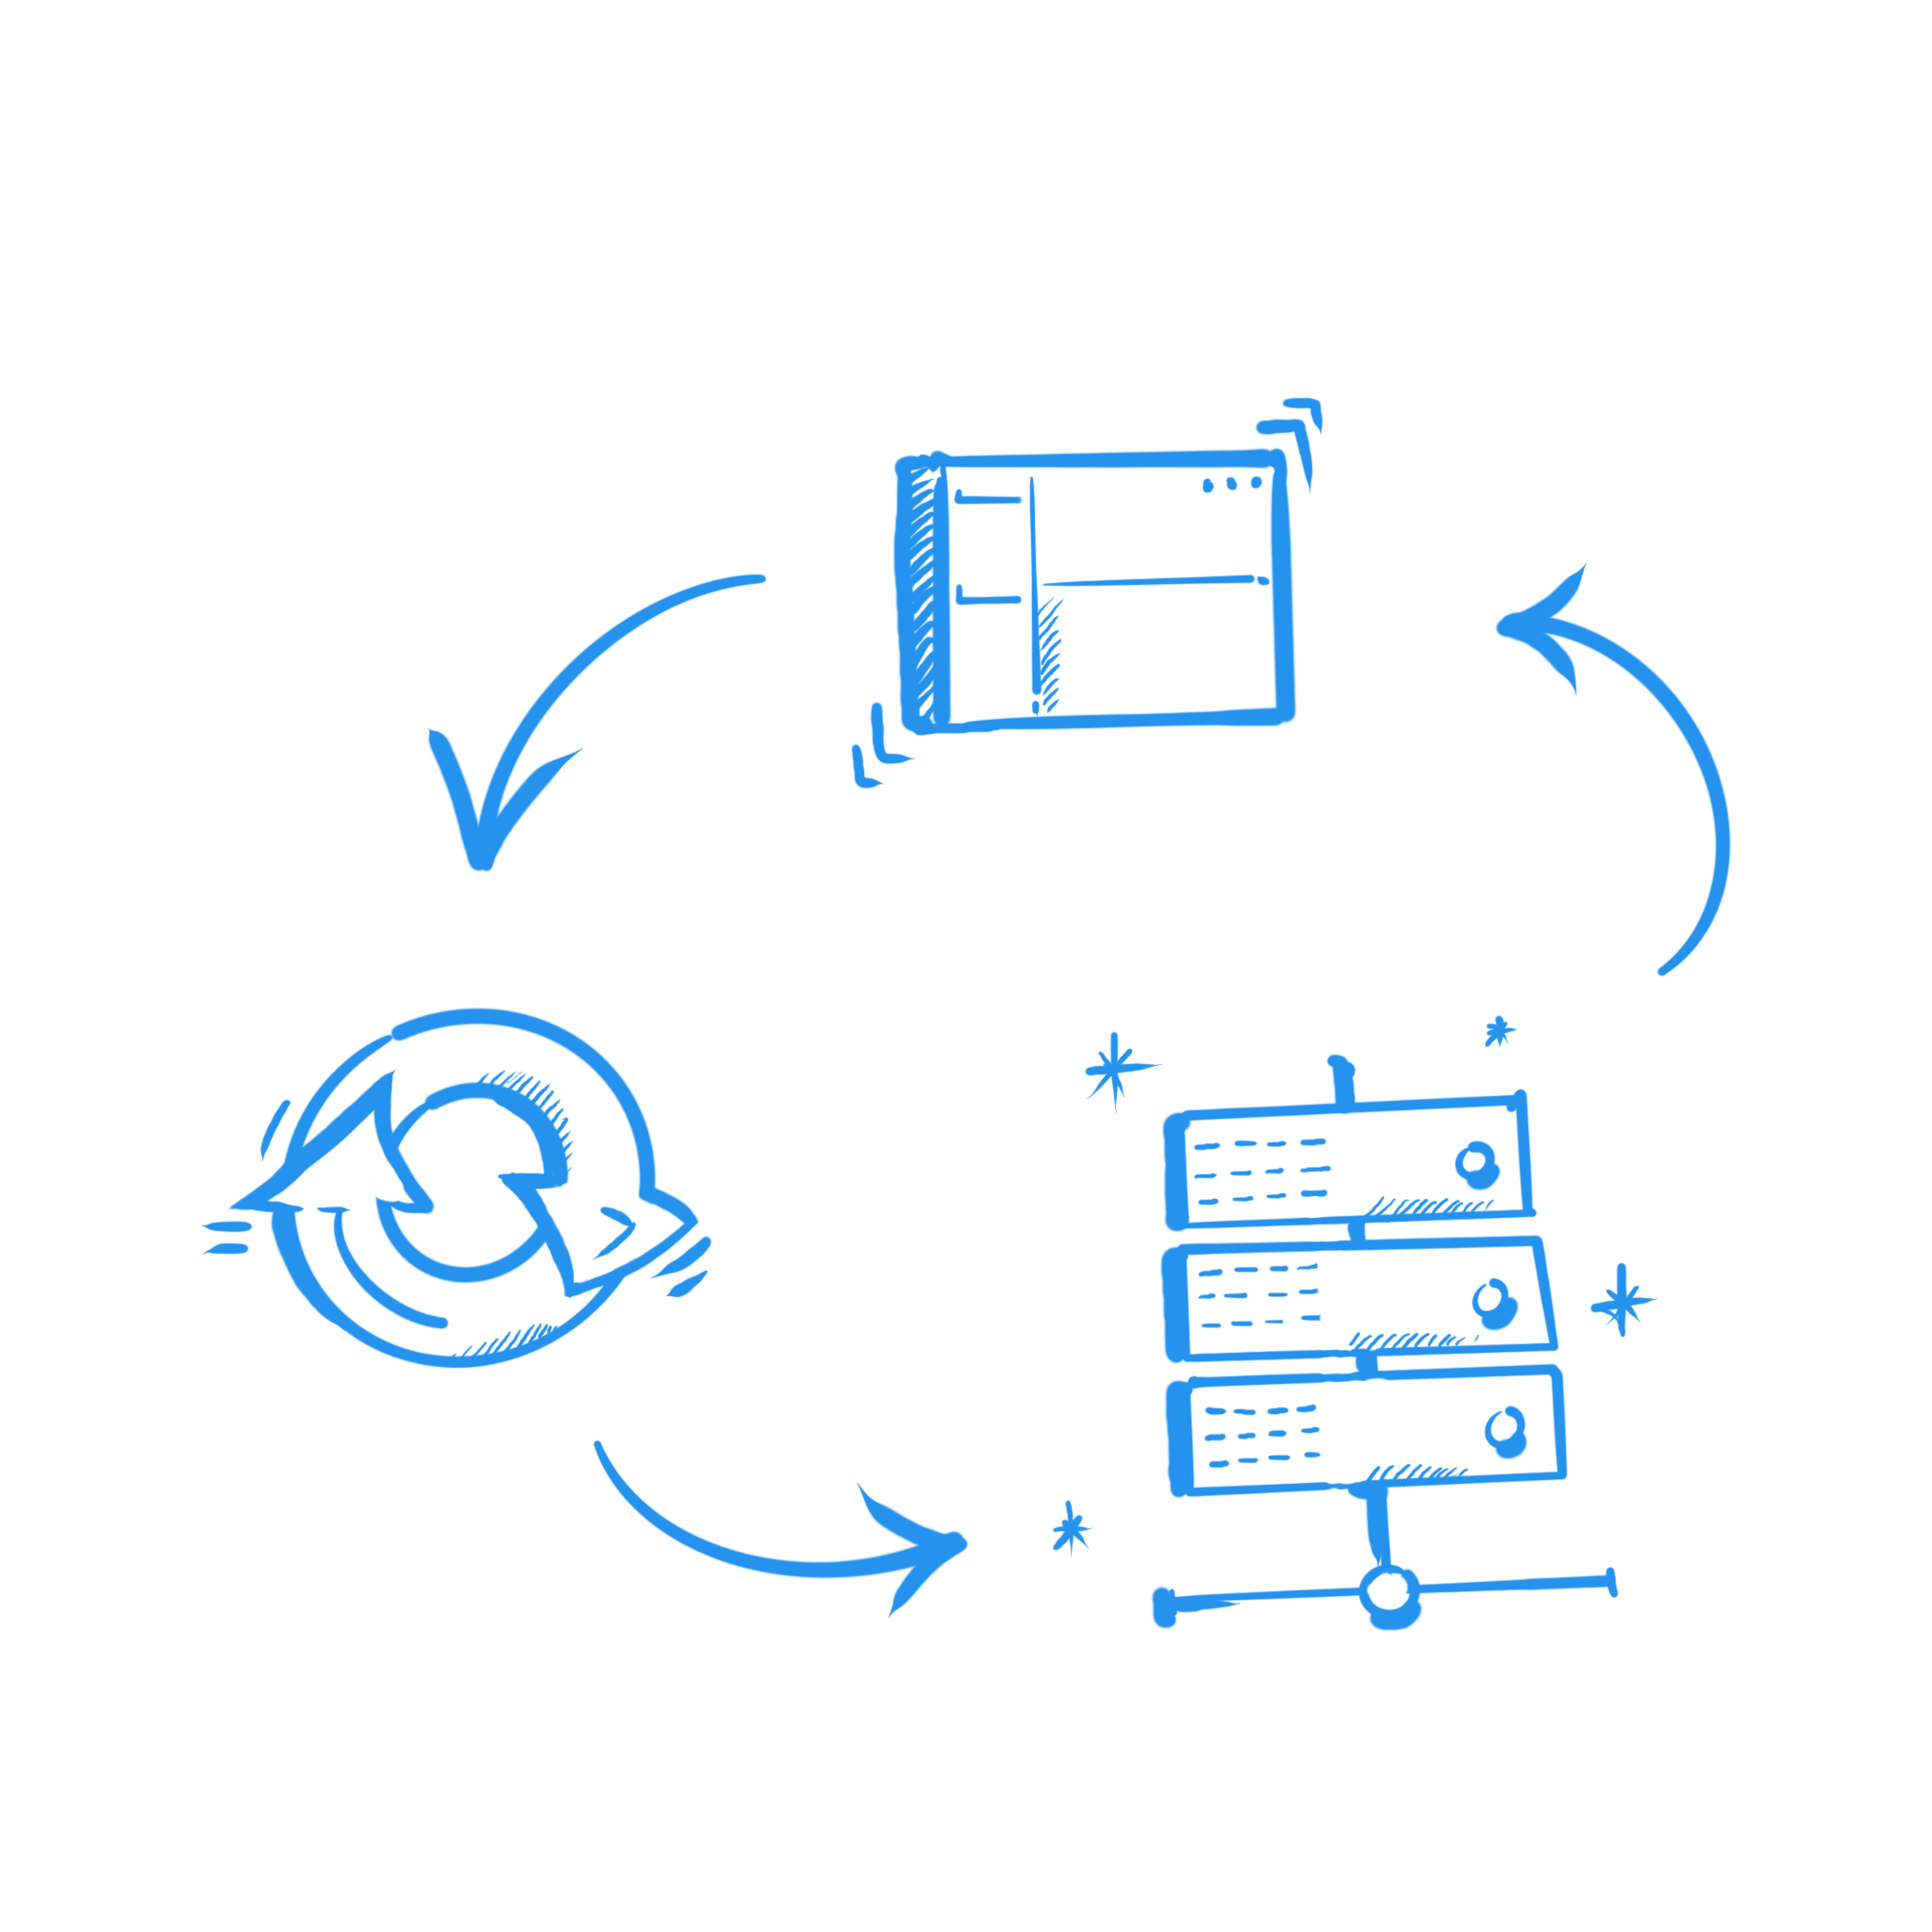 Illustration of a continuous cycle with a web browser window, a sync or update icon, and a server rack, indicating a process of technological interaction or data exchange.